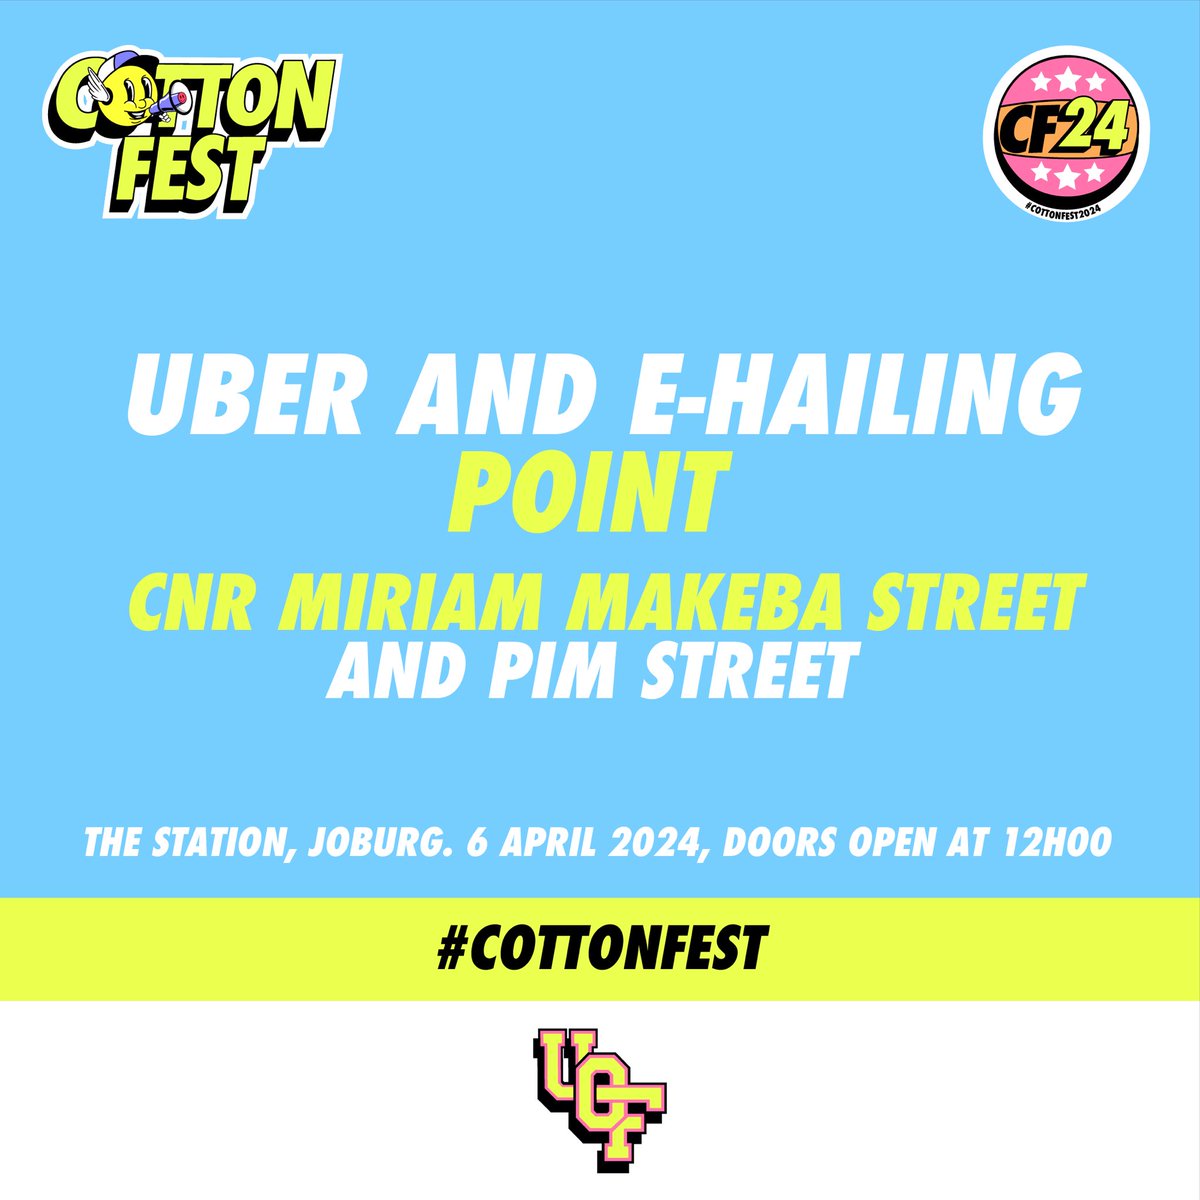 Cotton Eaters 🙃 The designated Uber and e-hailing pick and drop off area for UCF JOBURG, will be on the corner of Miriam Makeba Street and Pim Street 😁 Let’s be responsible, don’t drink and drive. Use Uber and other E-hailing services. 🚕 #cottonfest #votemusic #votefashion